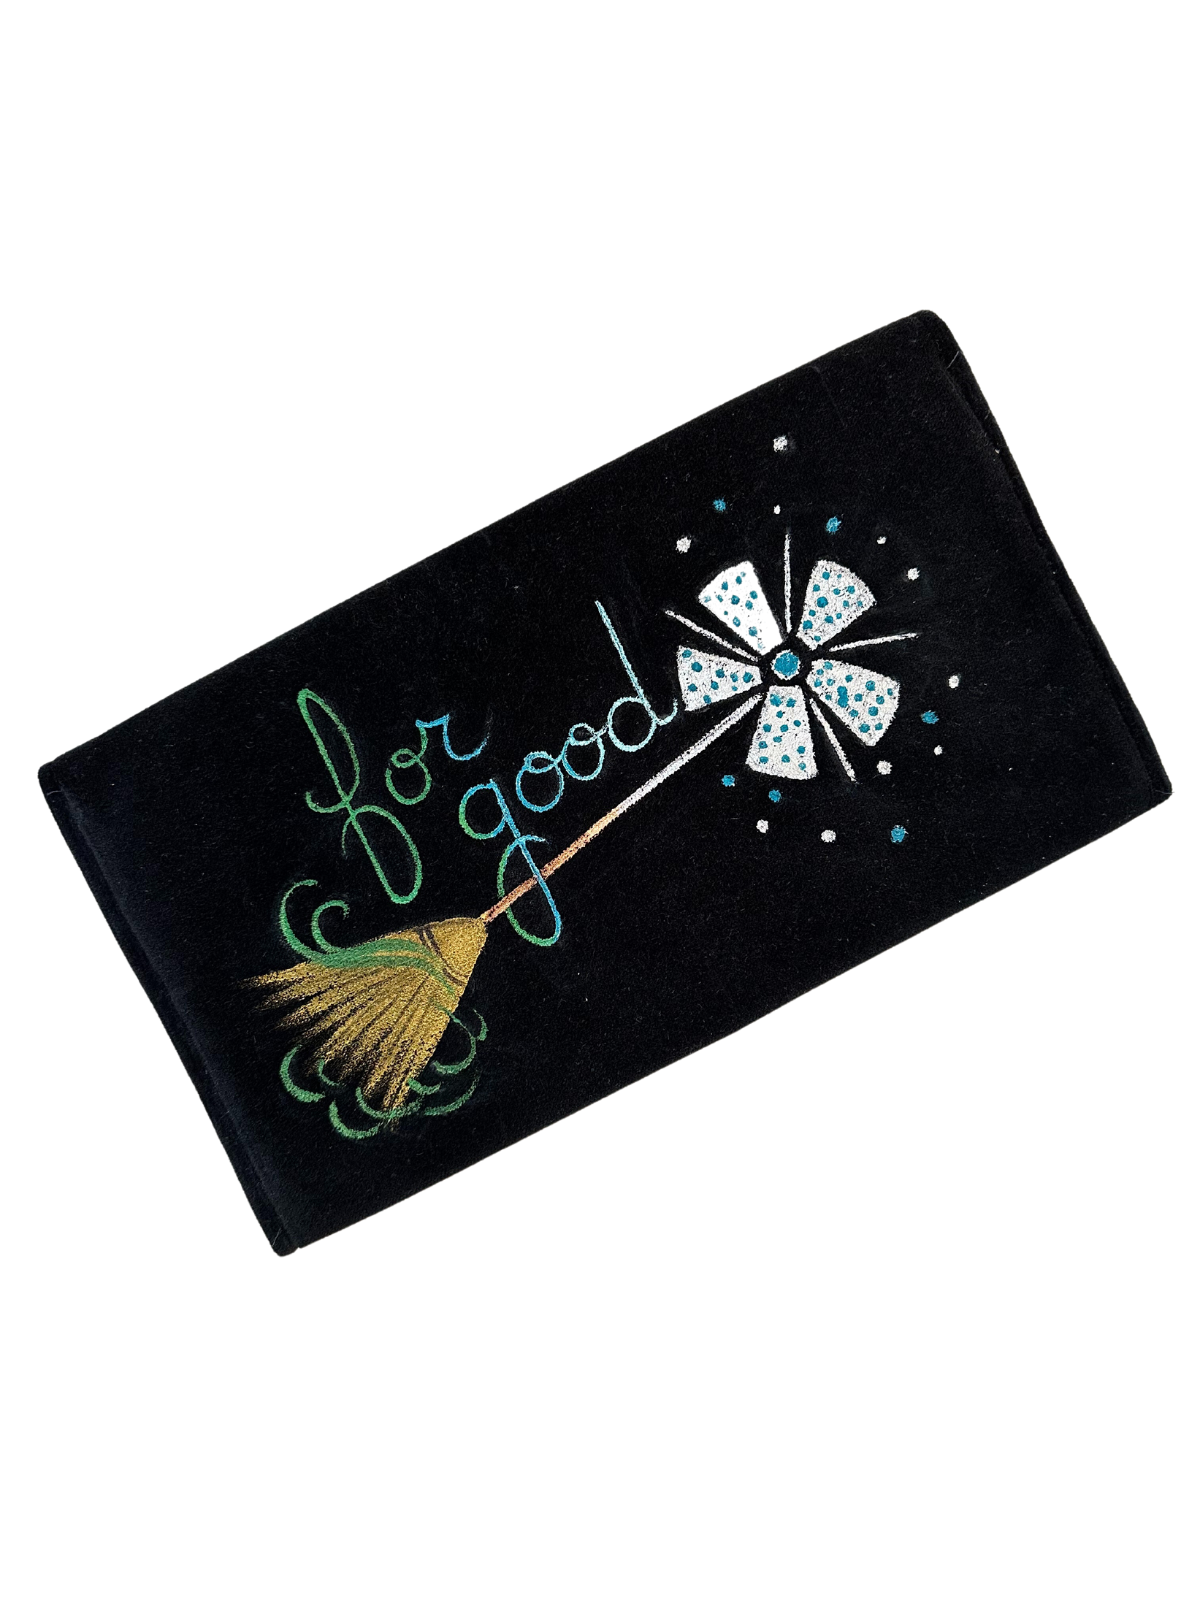 Hand Painted "For Good" Bag on Envelope Clutch - Scenery